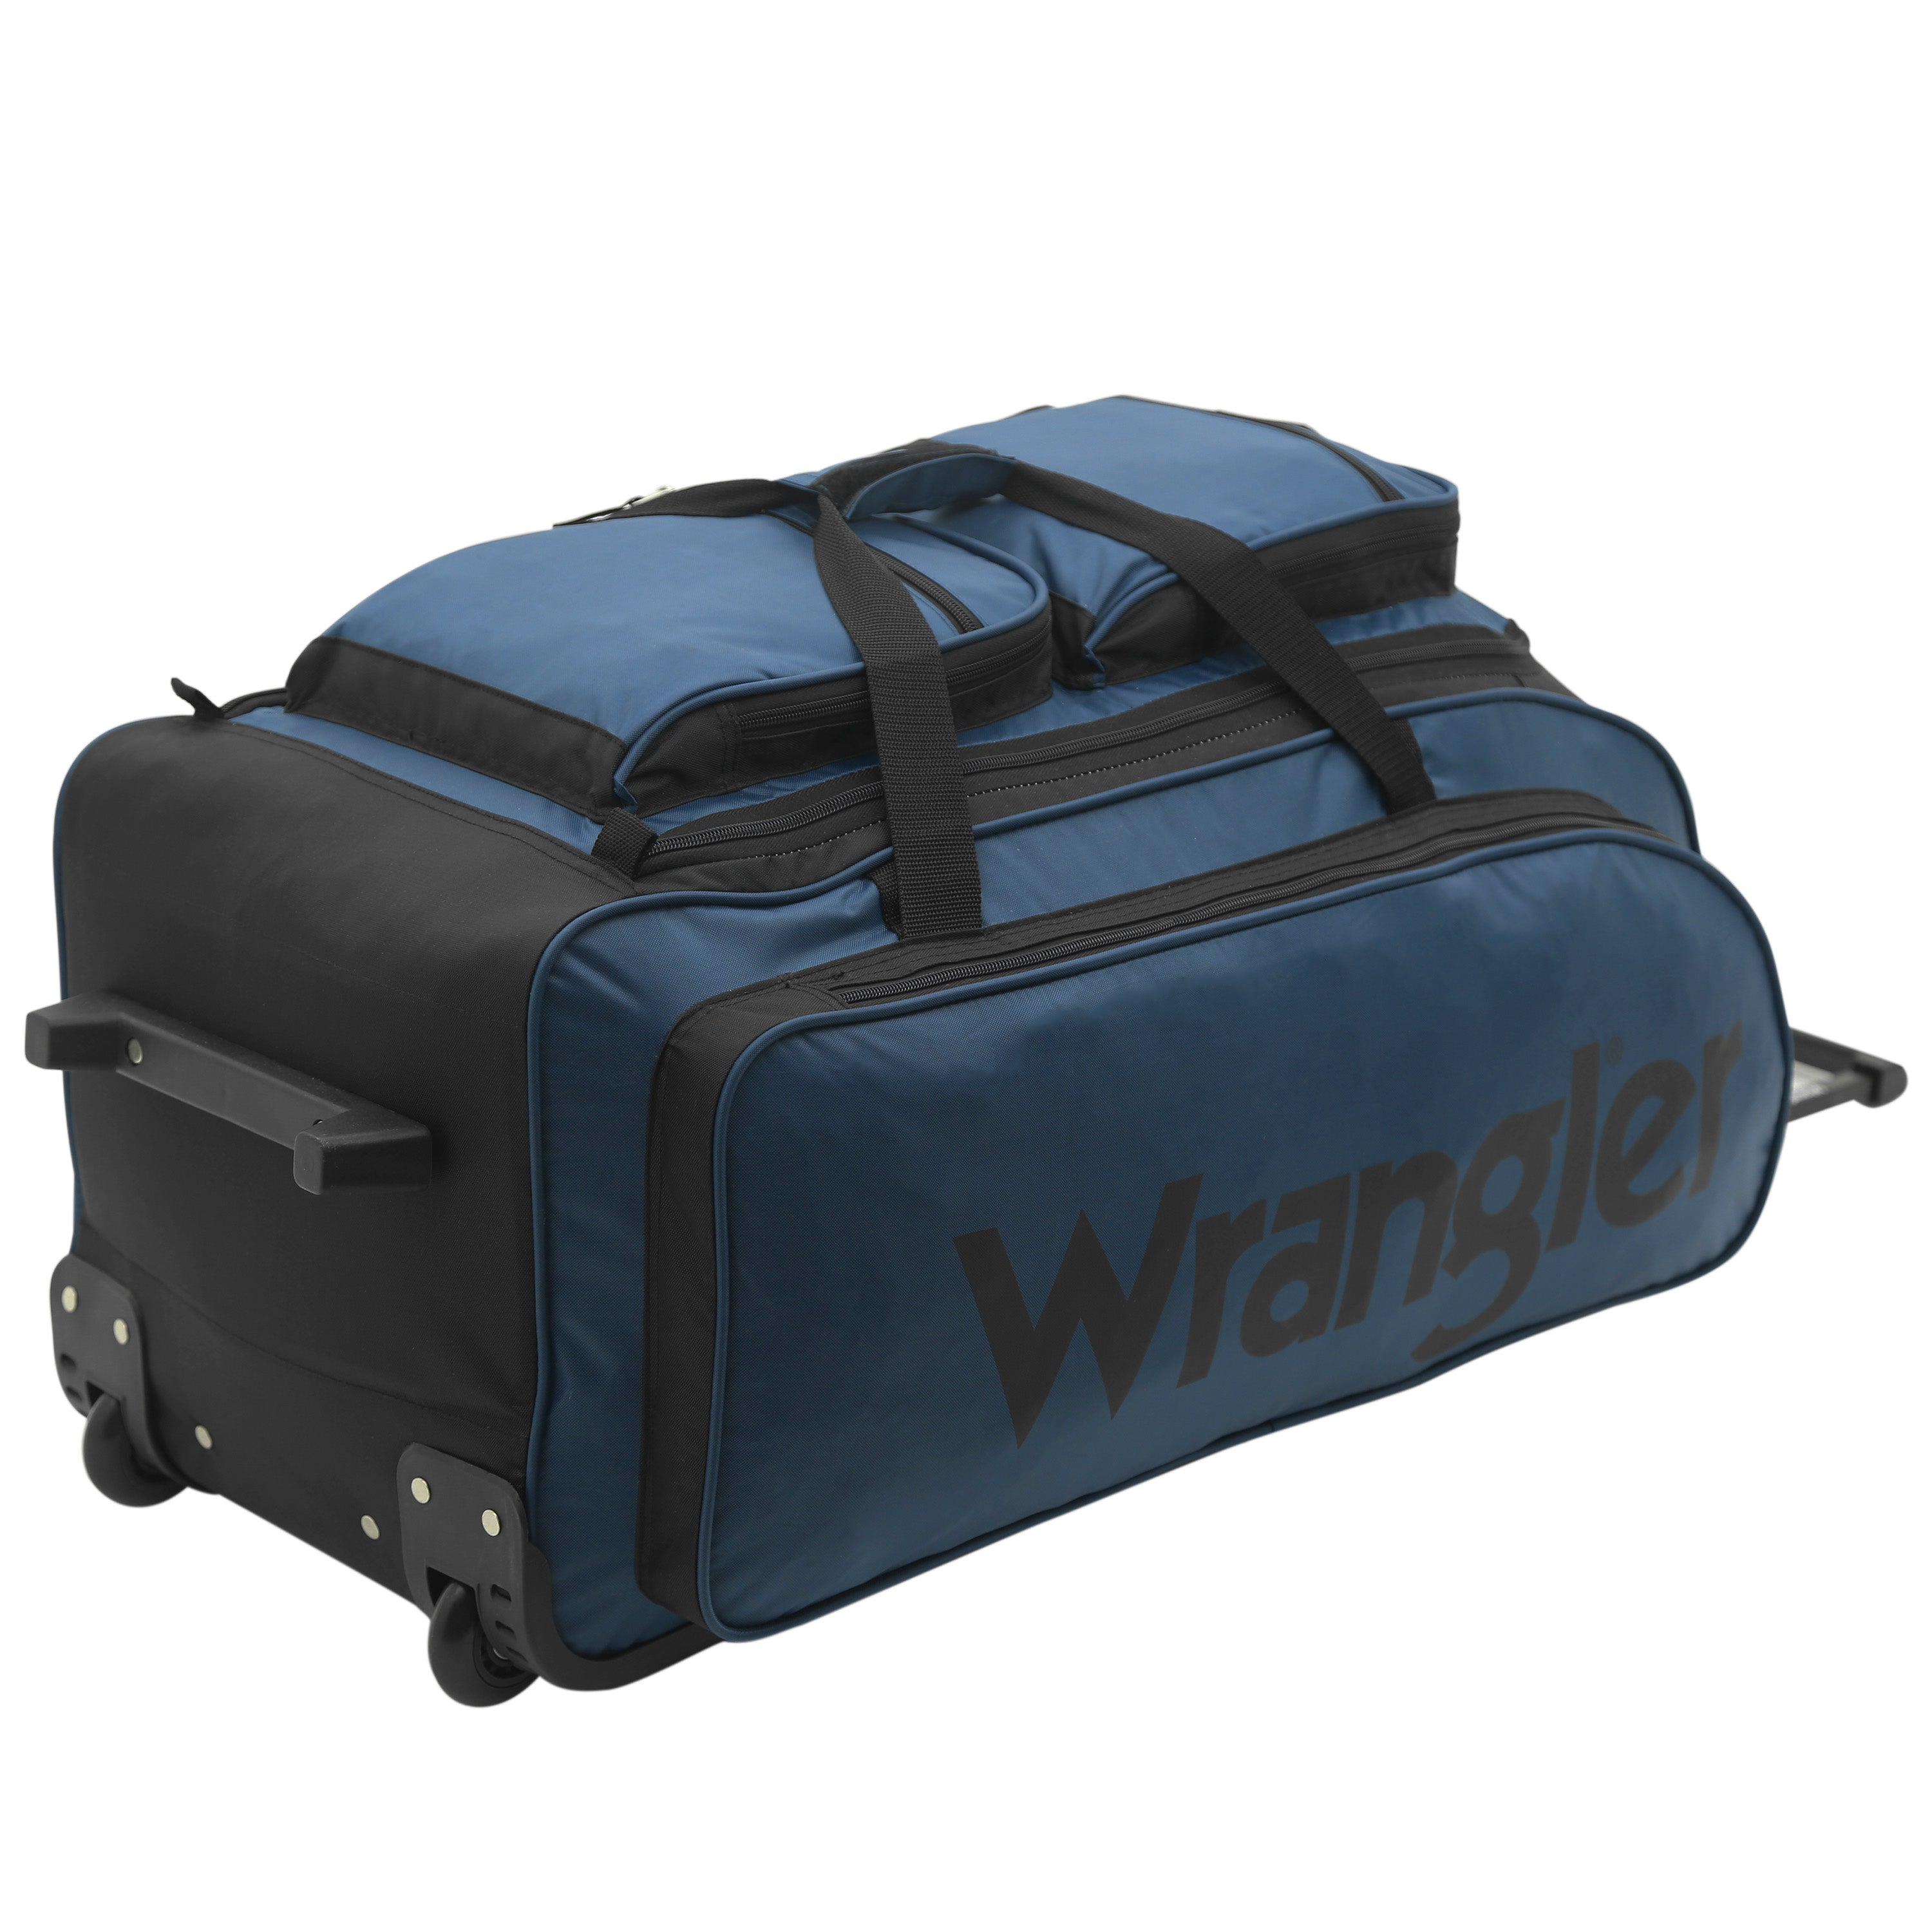 WESLEY COLLECTION 30Inch ROLLING MULTI-POCKET UPRIGHT DUFFEL